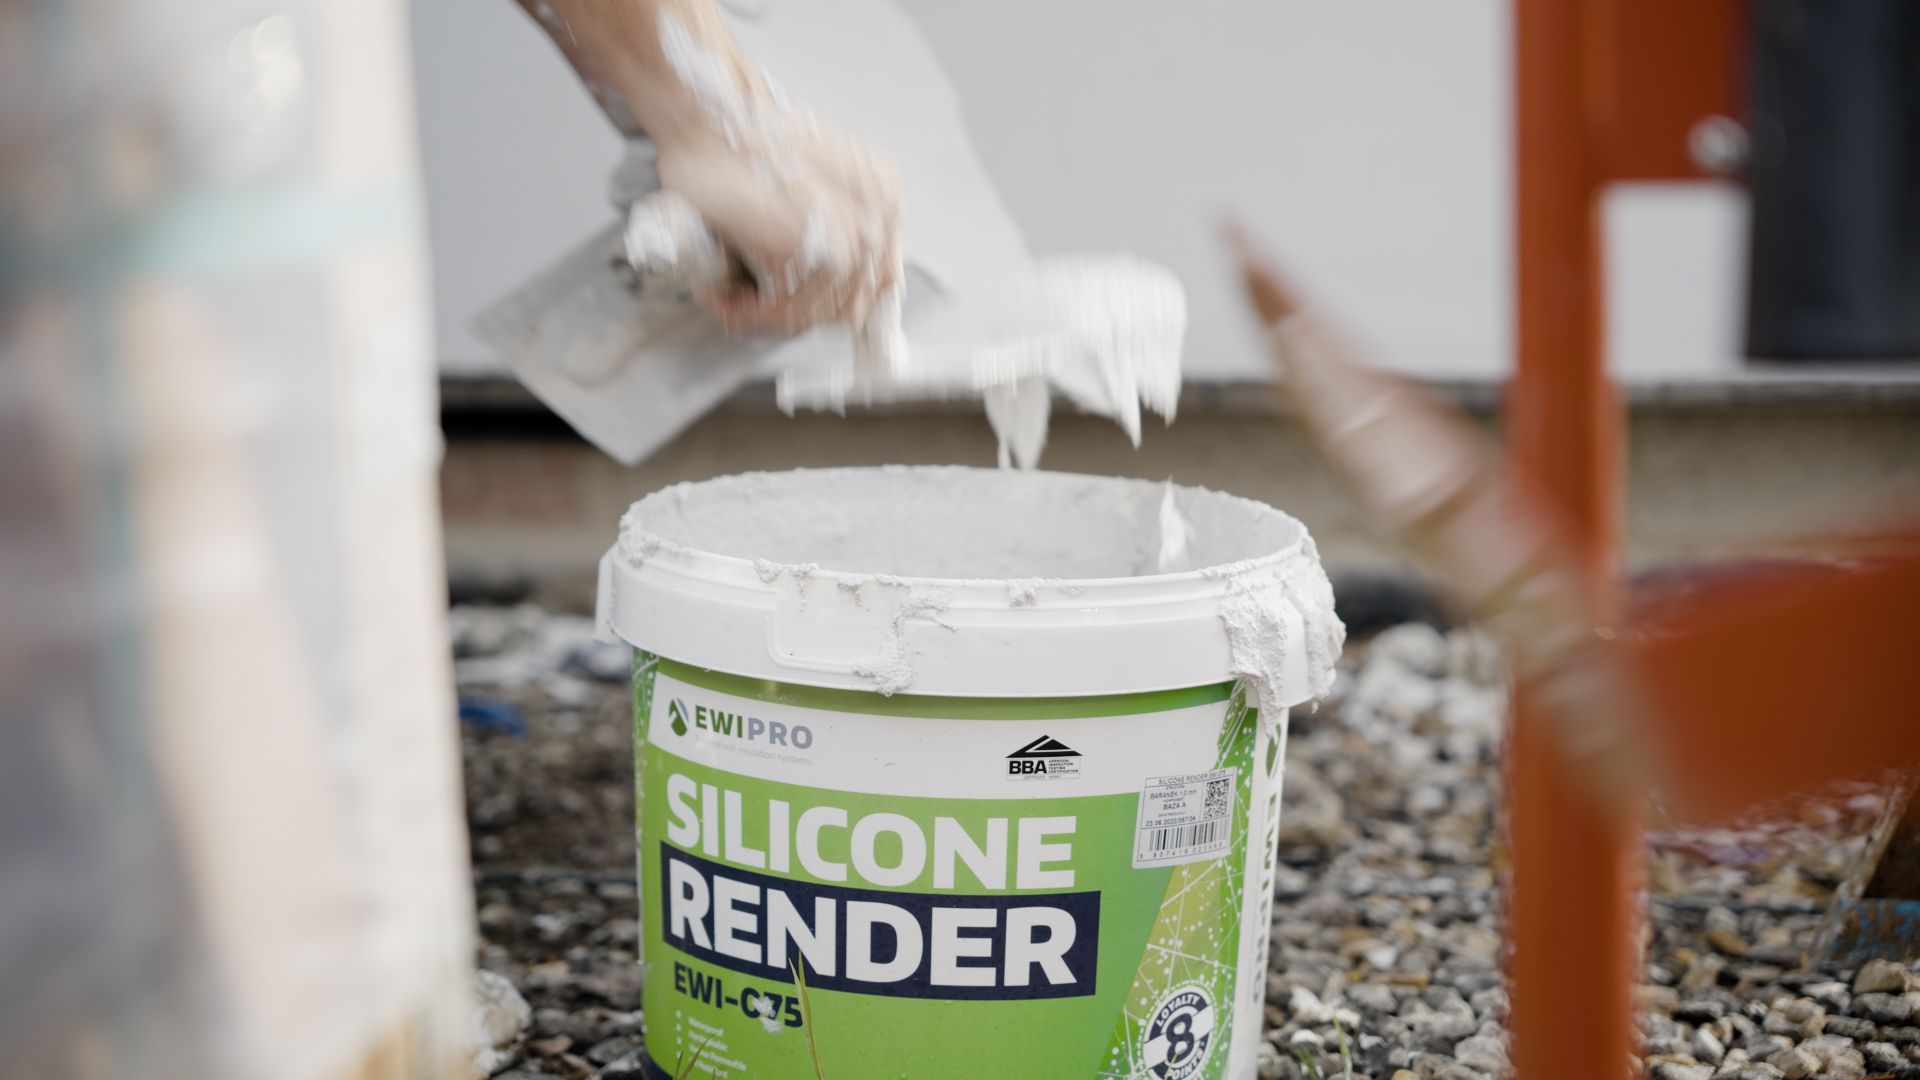 Silicone Render